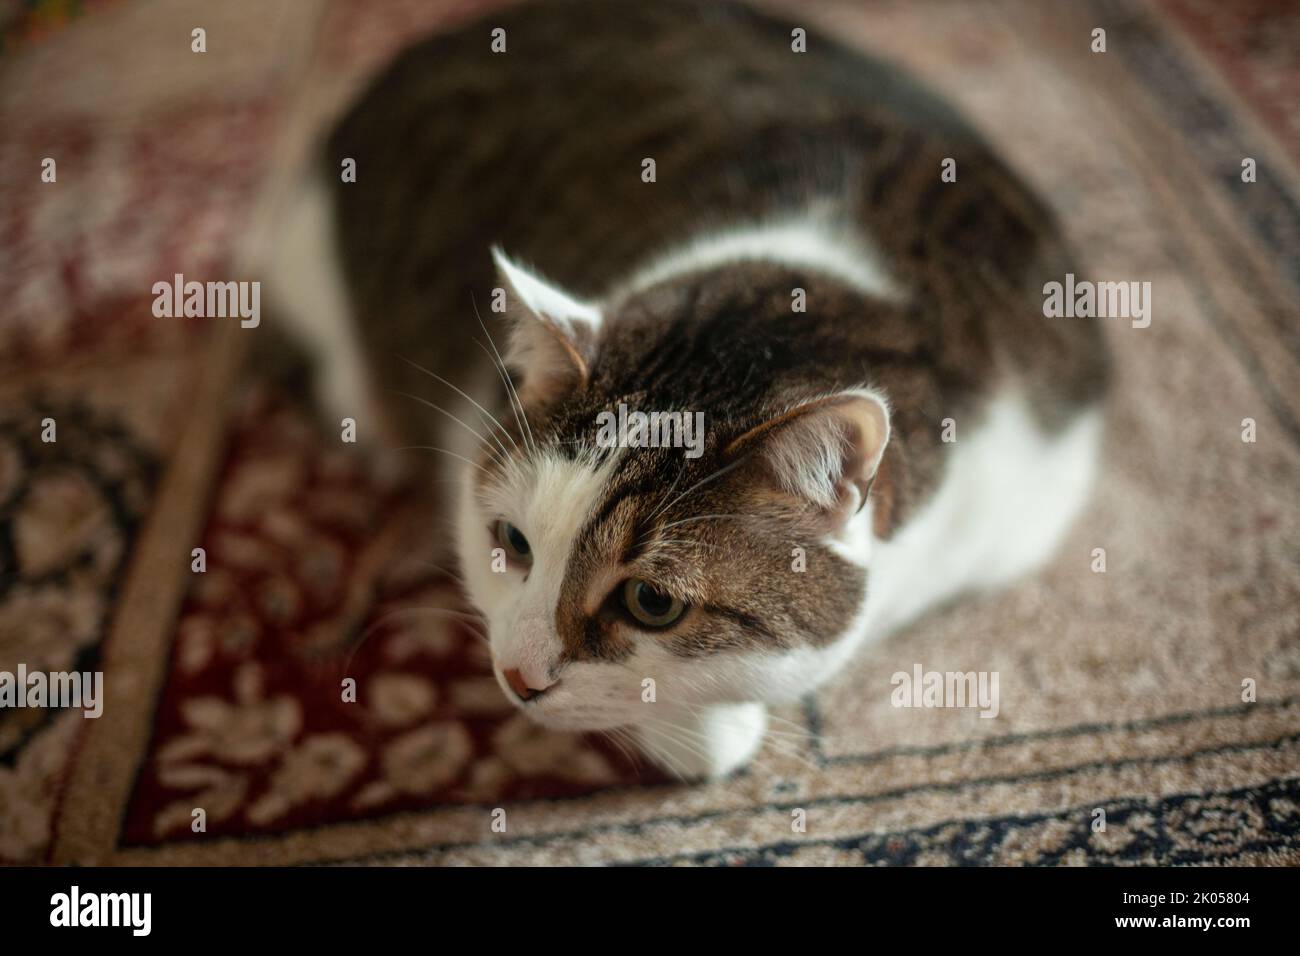 A domestic cat lies on the carpet. The cat looks into the camera. Big fat cat. Favorite pet. Stock Photo